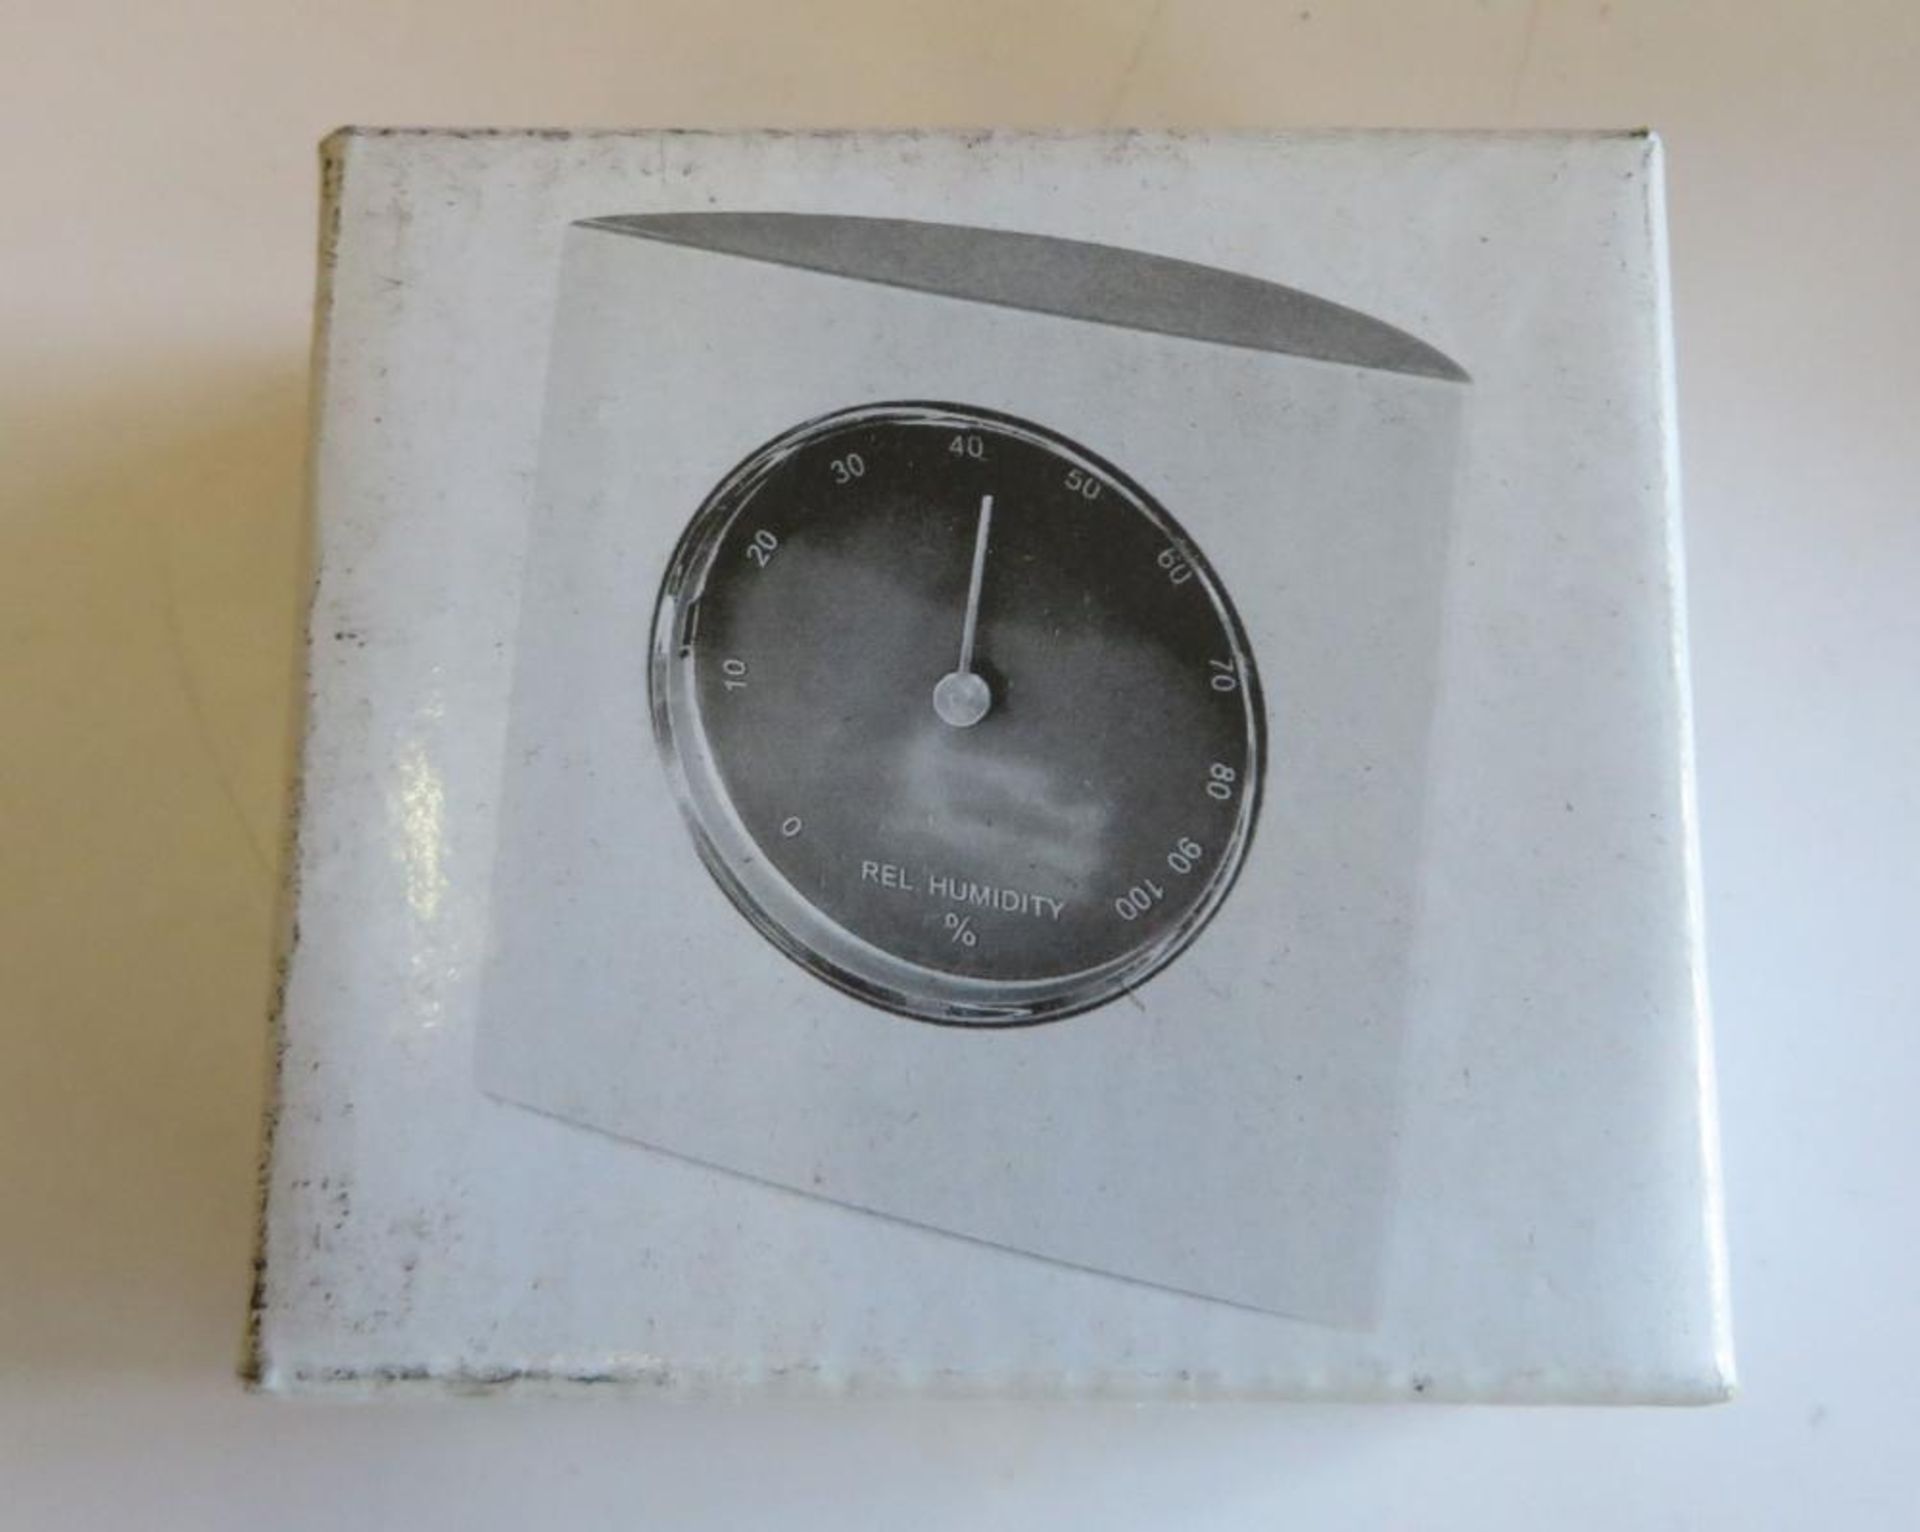 110 x Readers Digest Weather Station Hygrometers - Boxed - CL185 - Ref: DRT0684 - Location: Stoke ST - Image 4 of 5